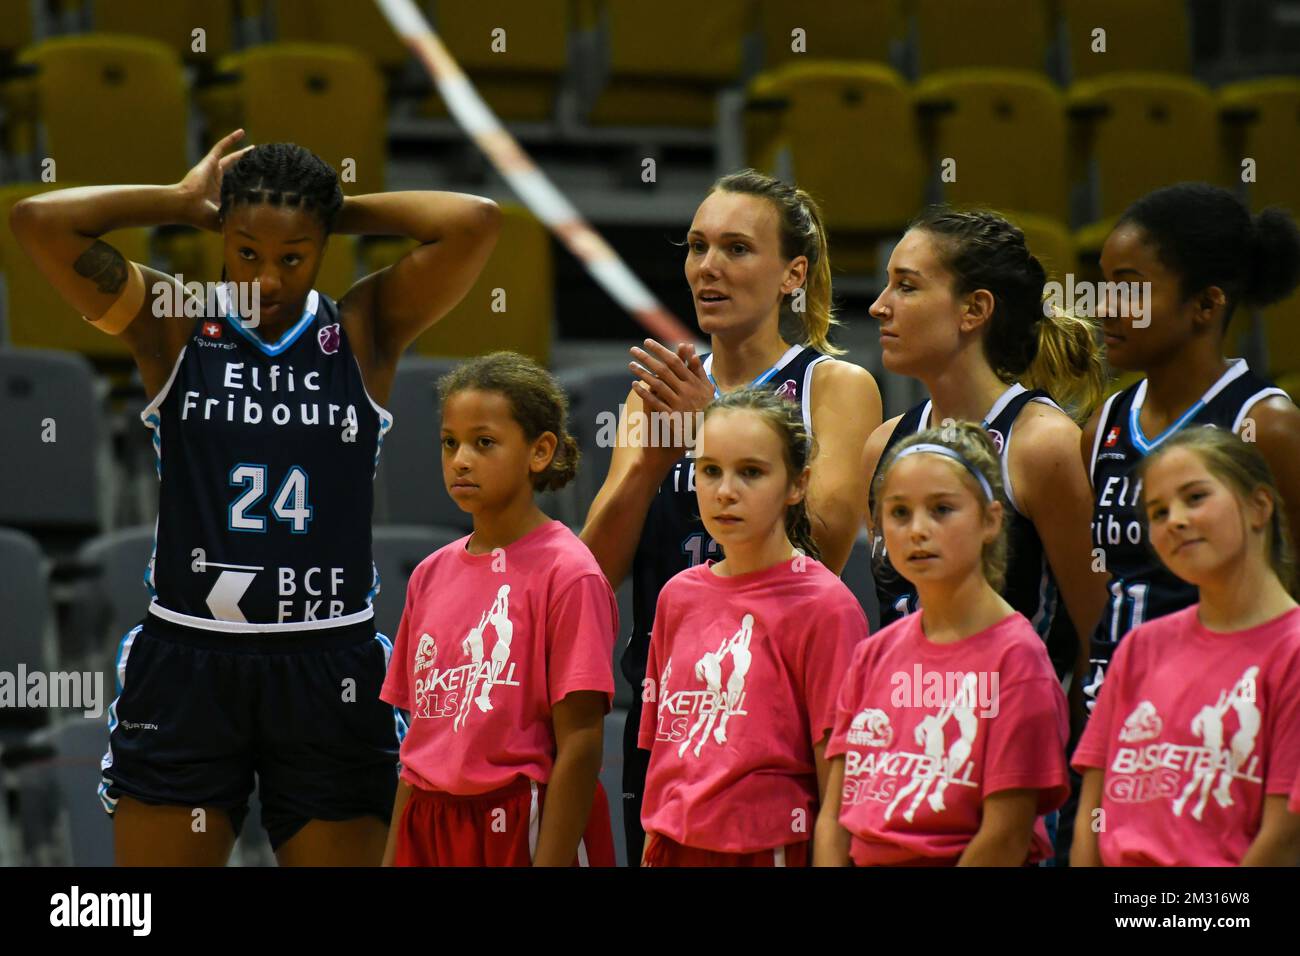 BCF Elfic Fribourg players pictured before a basketball match between VOO Liege Panthers and BCF Elfic Fribourg, on the gameday 2, group J of the EuroCup Women, Wednesday 23 October 2019, Liege, Country Hall du Sart Tilman. PHOTO BERNARD GILLET Stock Photo